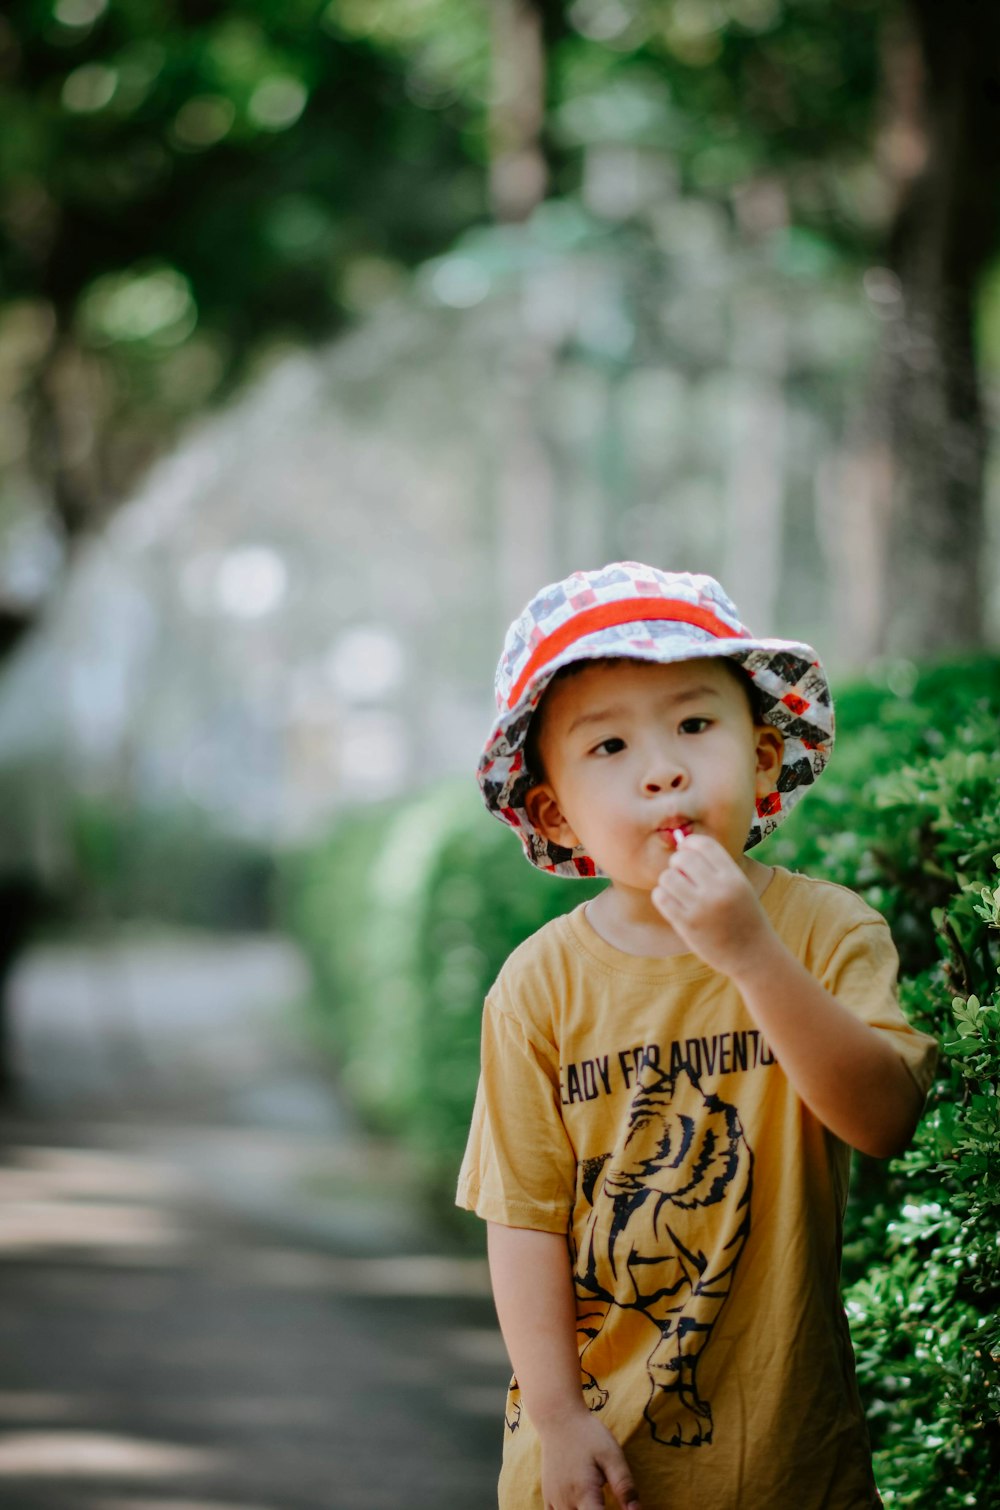 a young boy wearing a hat and eating something